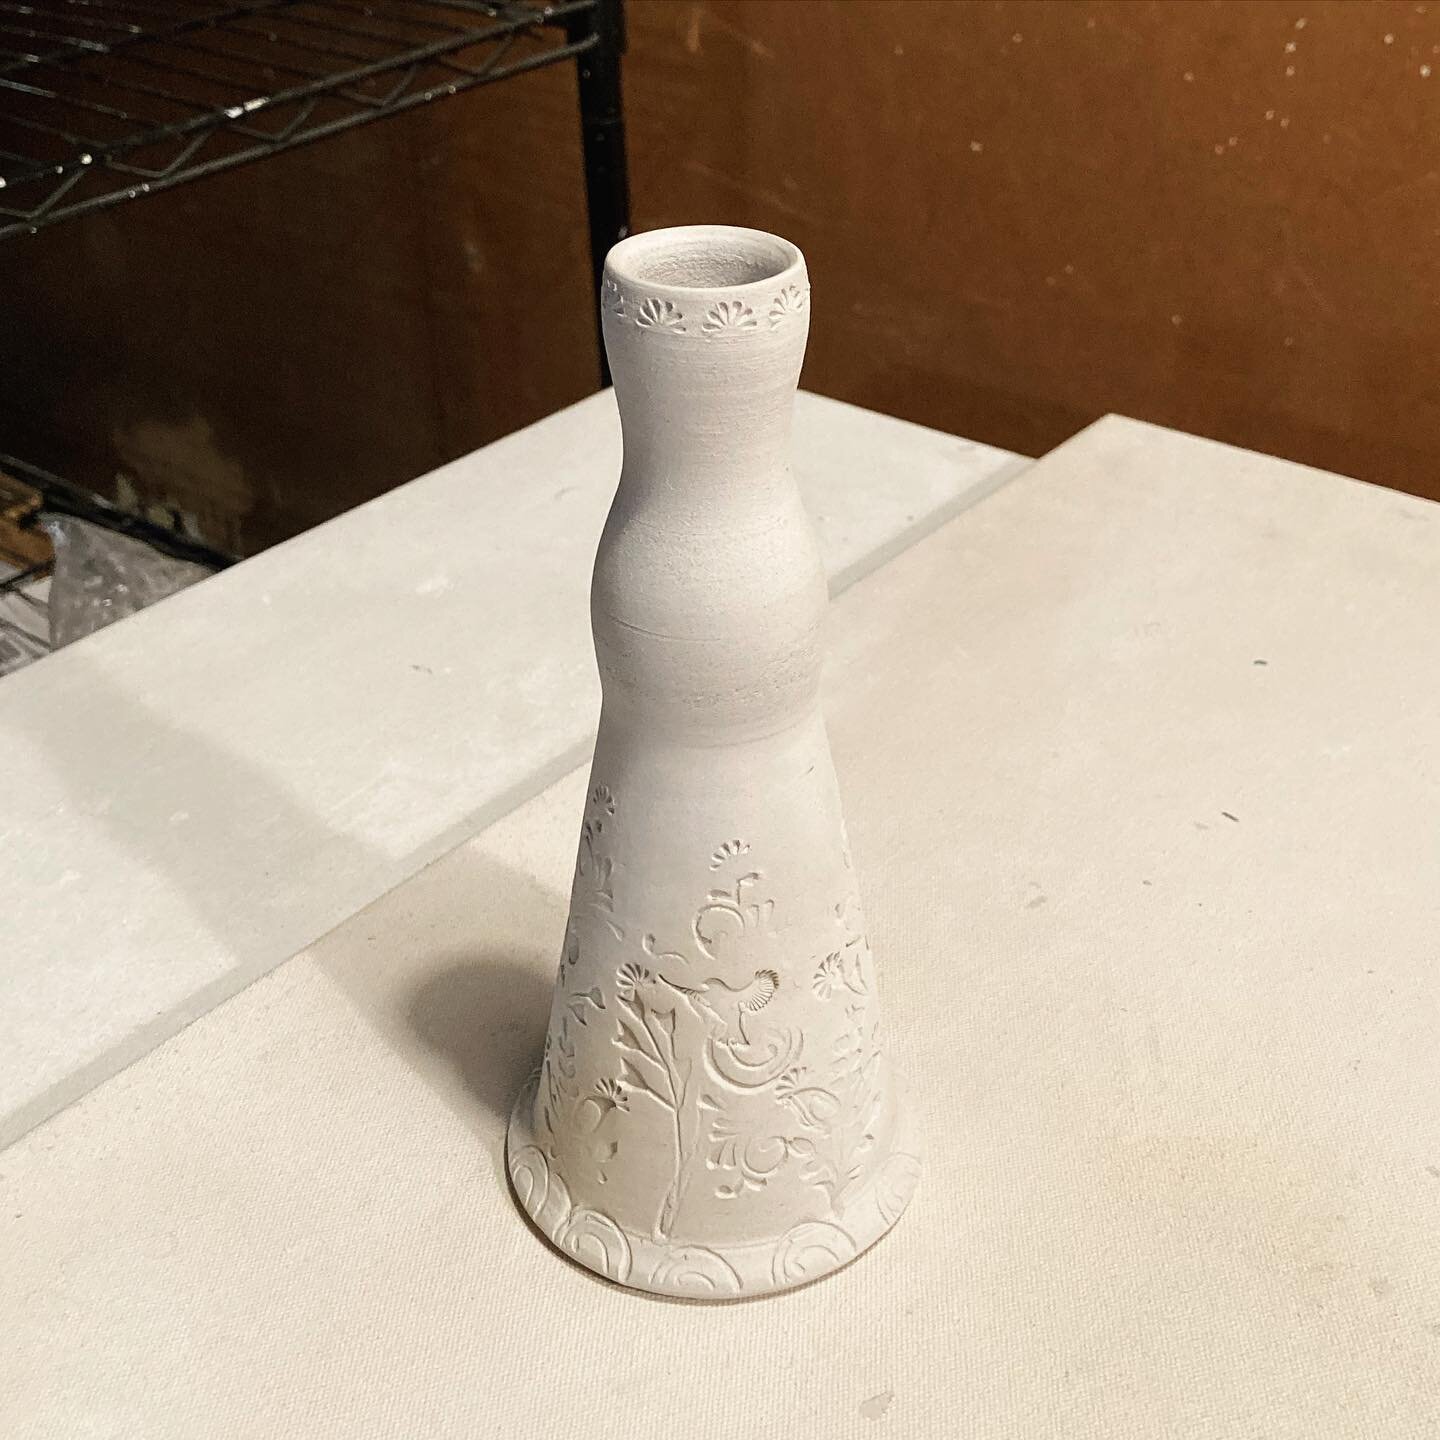 I&rsquo;m working out some #candlestick forms, my funky garage taking on some Rembrandt-esque qualities in this light. My favorite part of winter is the light it forces us to create. 🕯️ #ceramics #ceramic #interiordecor #handmadeceramics #wheelthrow